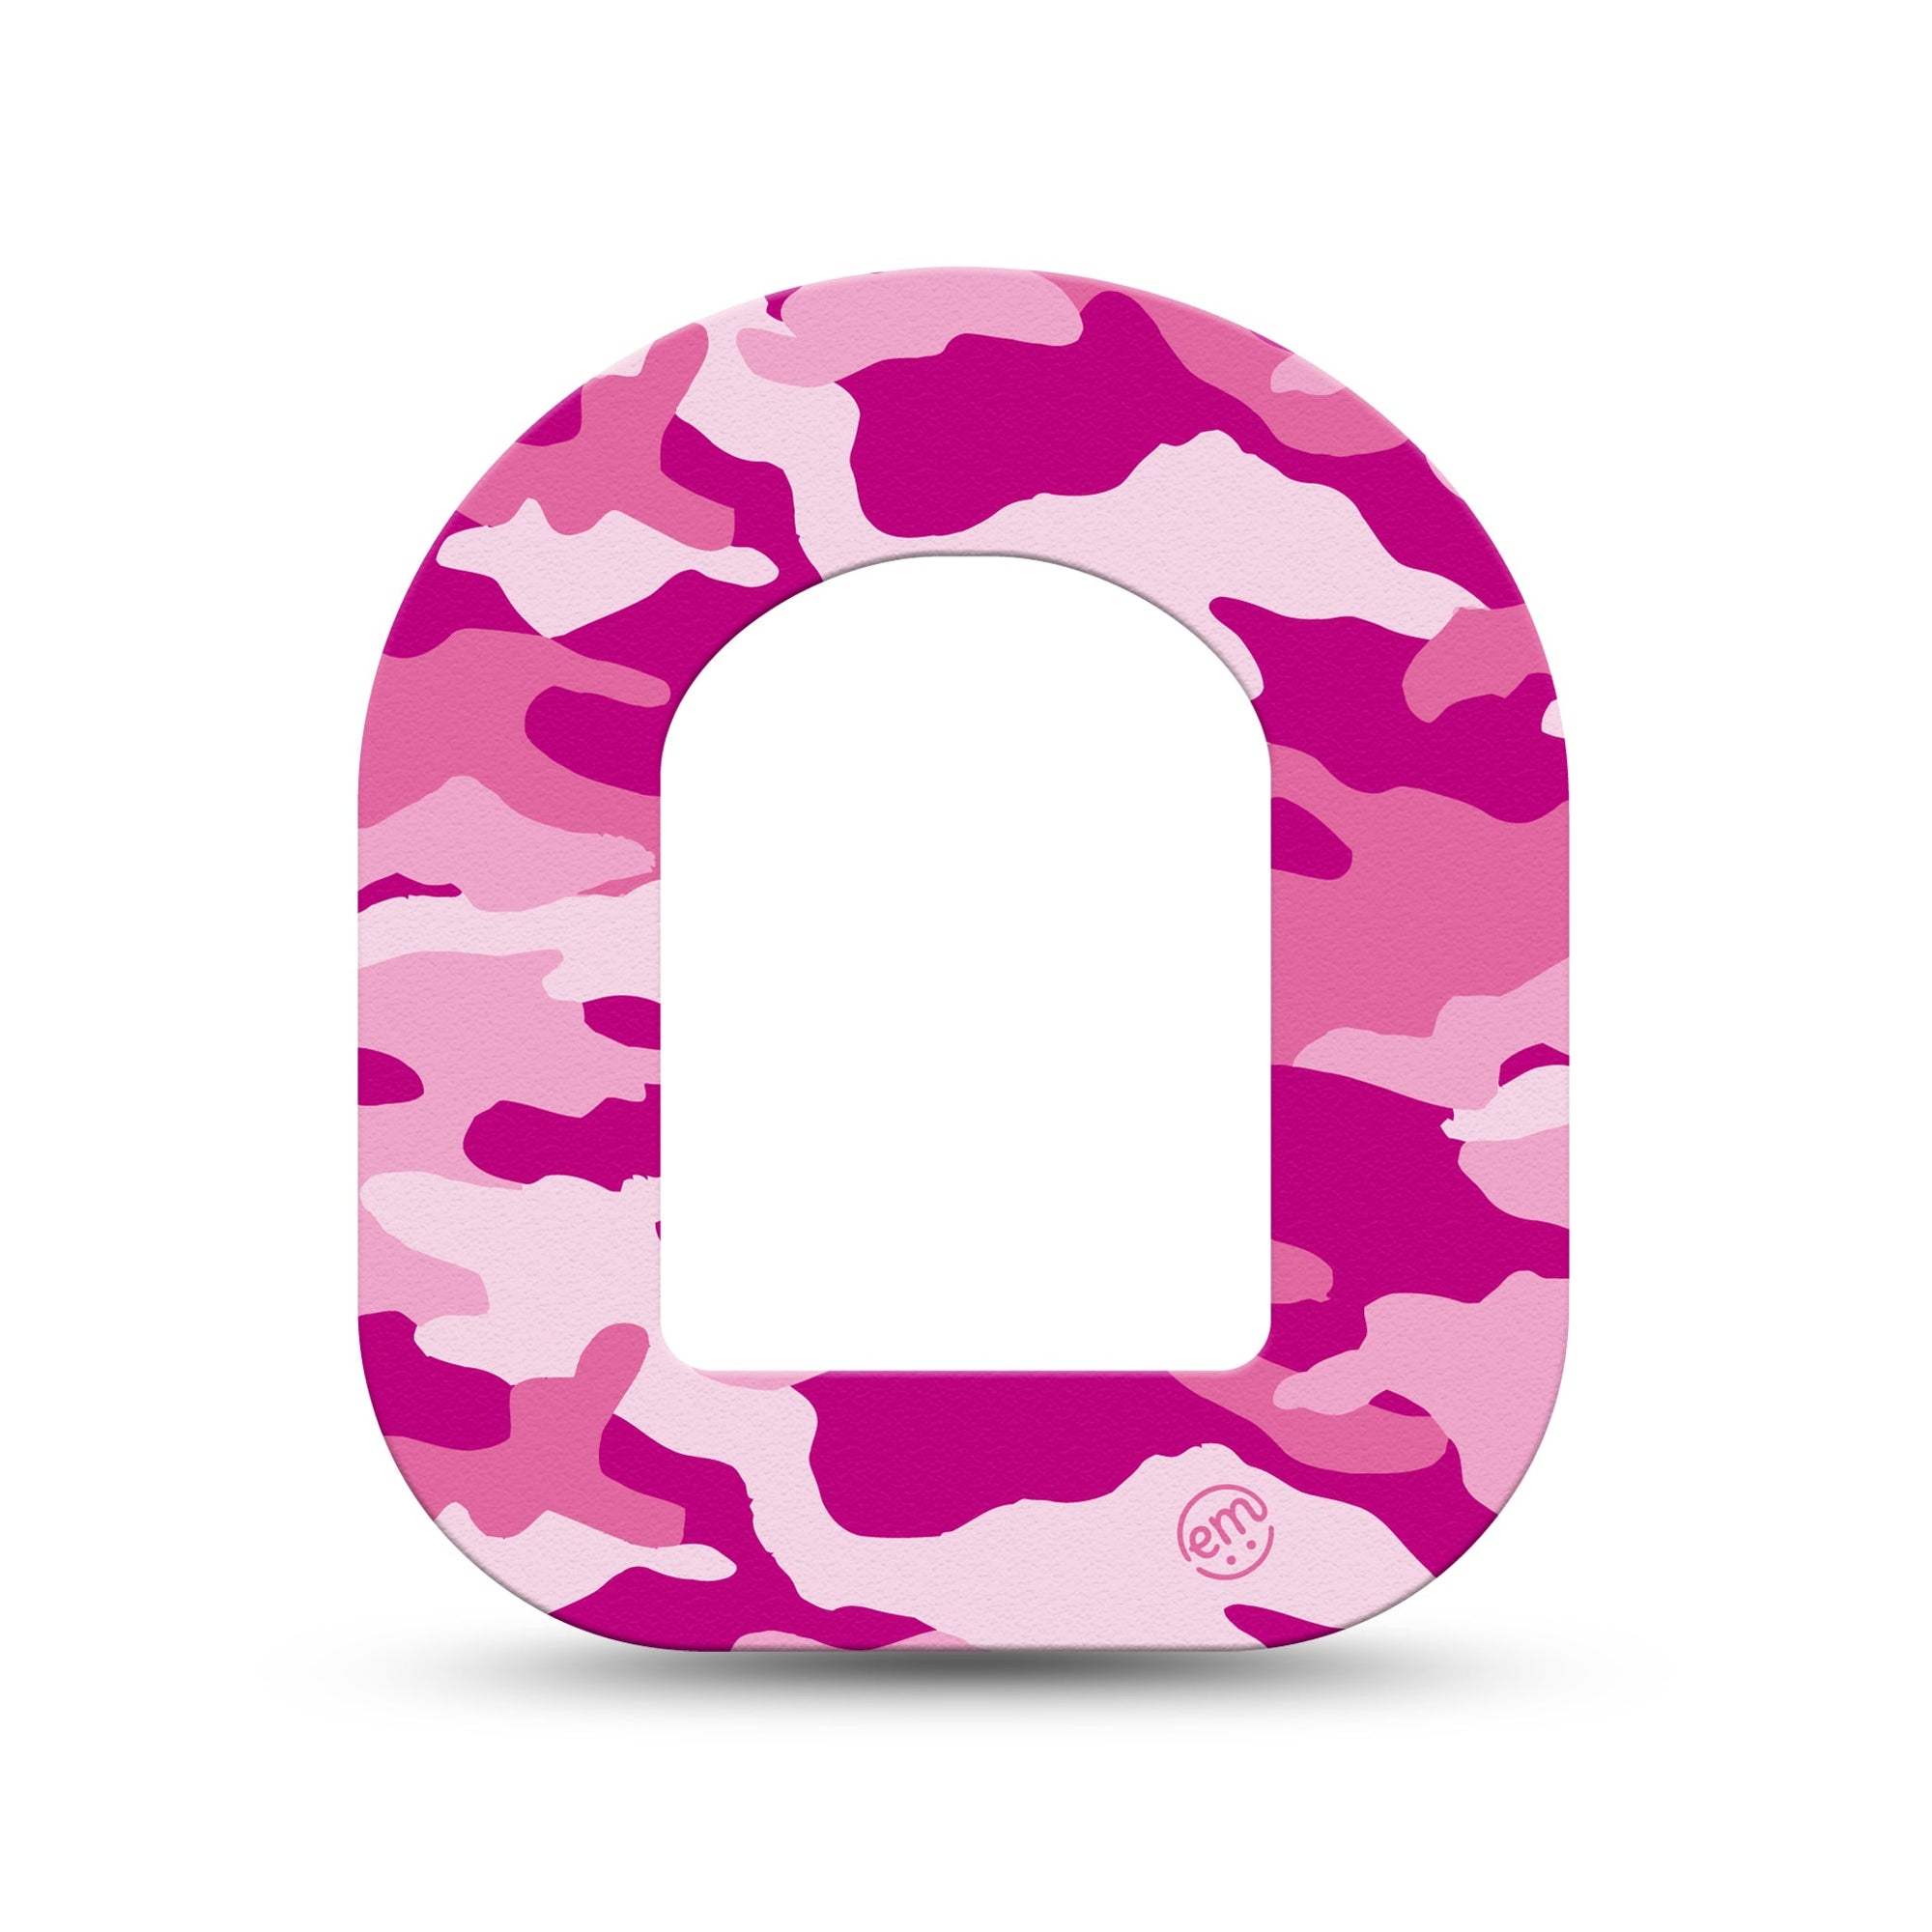 ExpressionMed Pink Camo Pod Mini Tape Single, Girly Blend Fixing Ring Patch Pump Design